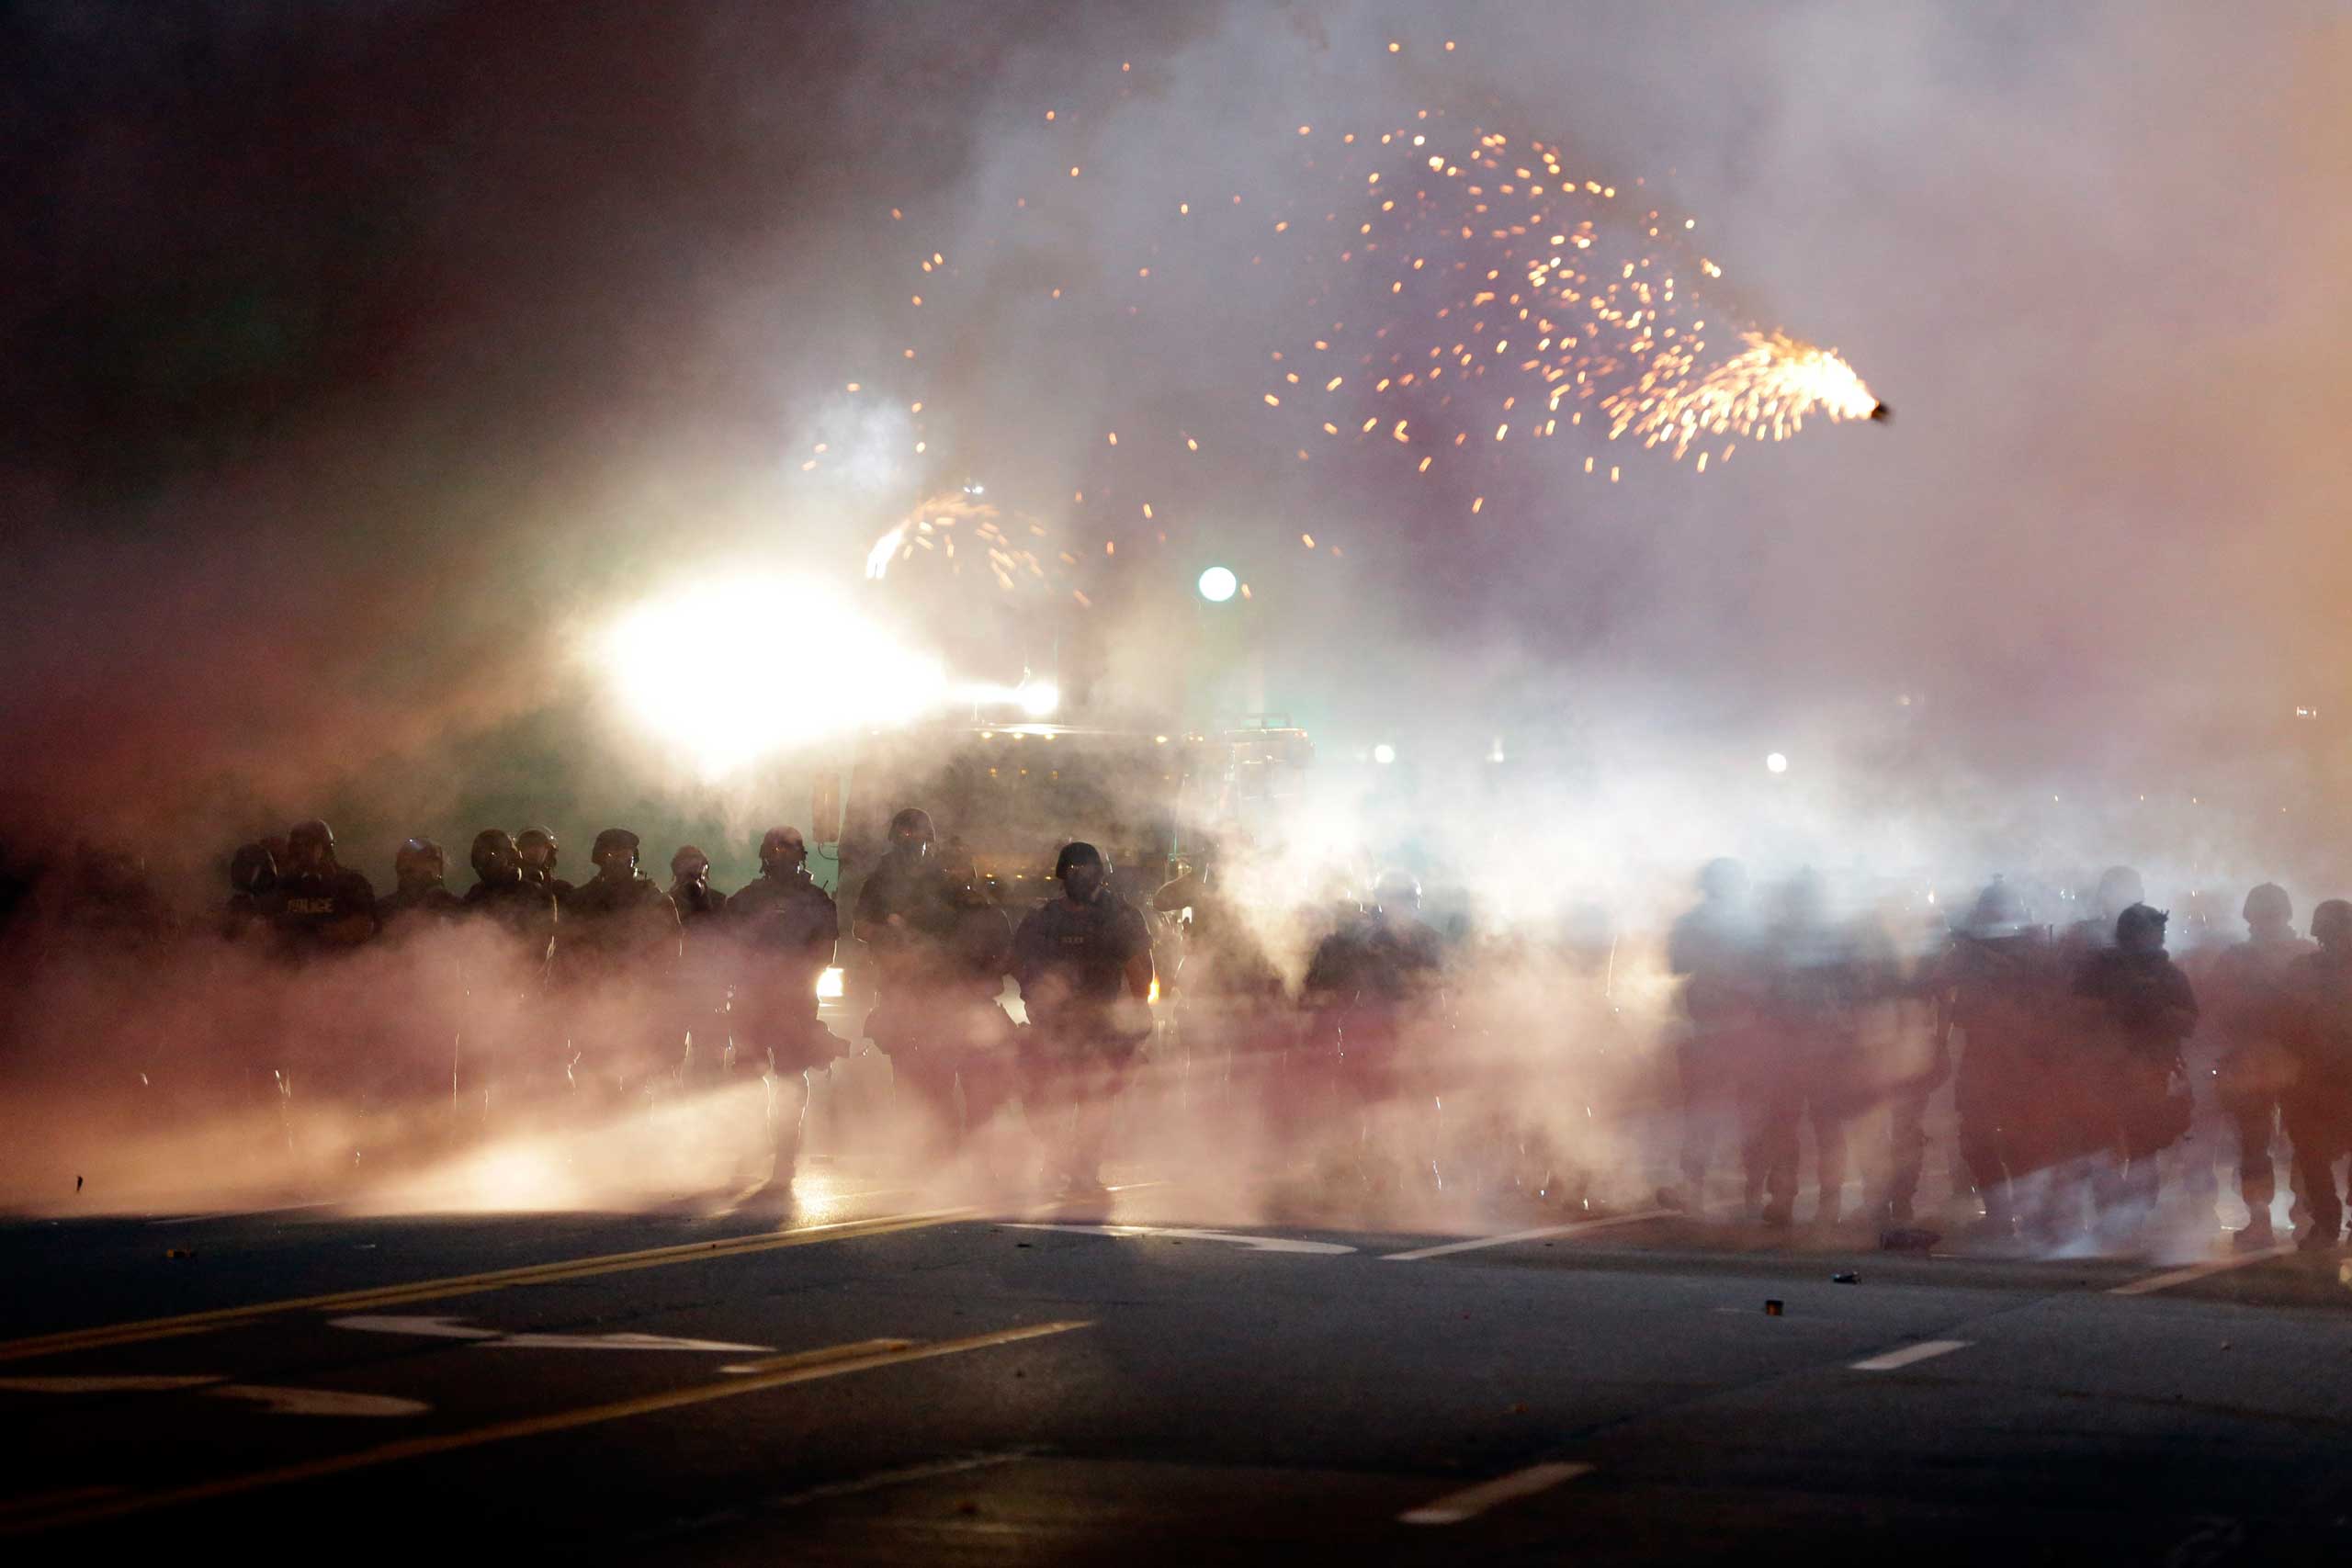 An explosive device deployed by police flies in the air as police and protesters clash after tear gas was thrown on Aug. 13, 2014, in Ferguson, Mo. (Jeff Roberson—AP)